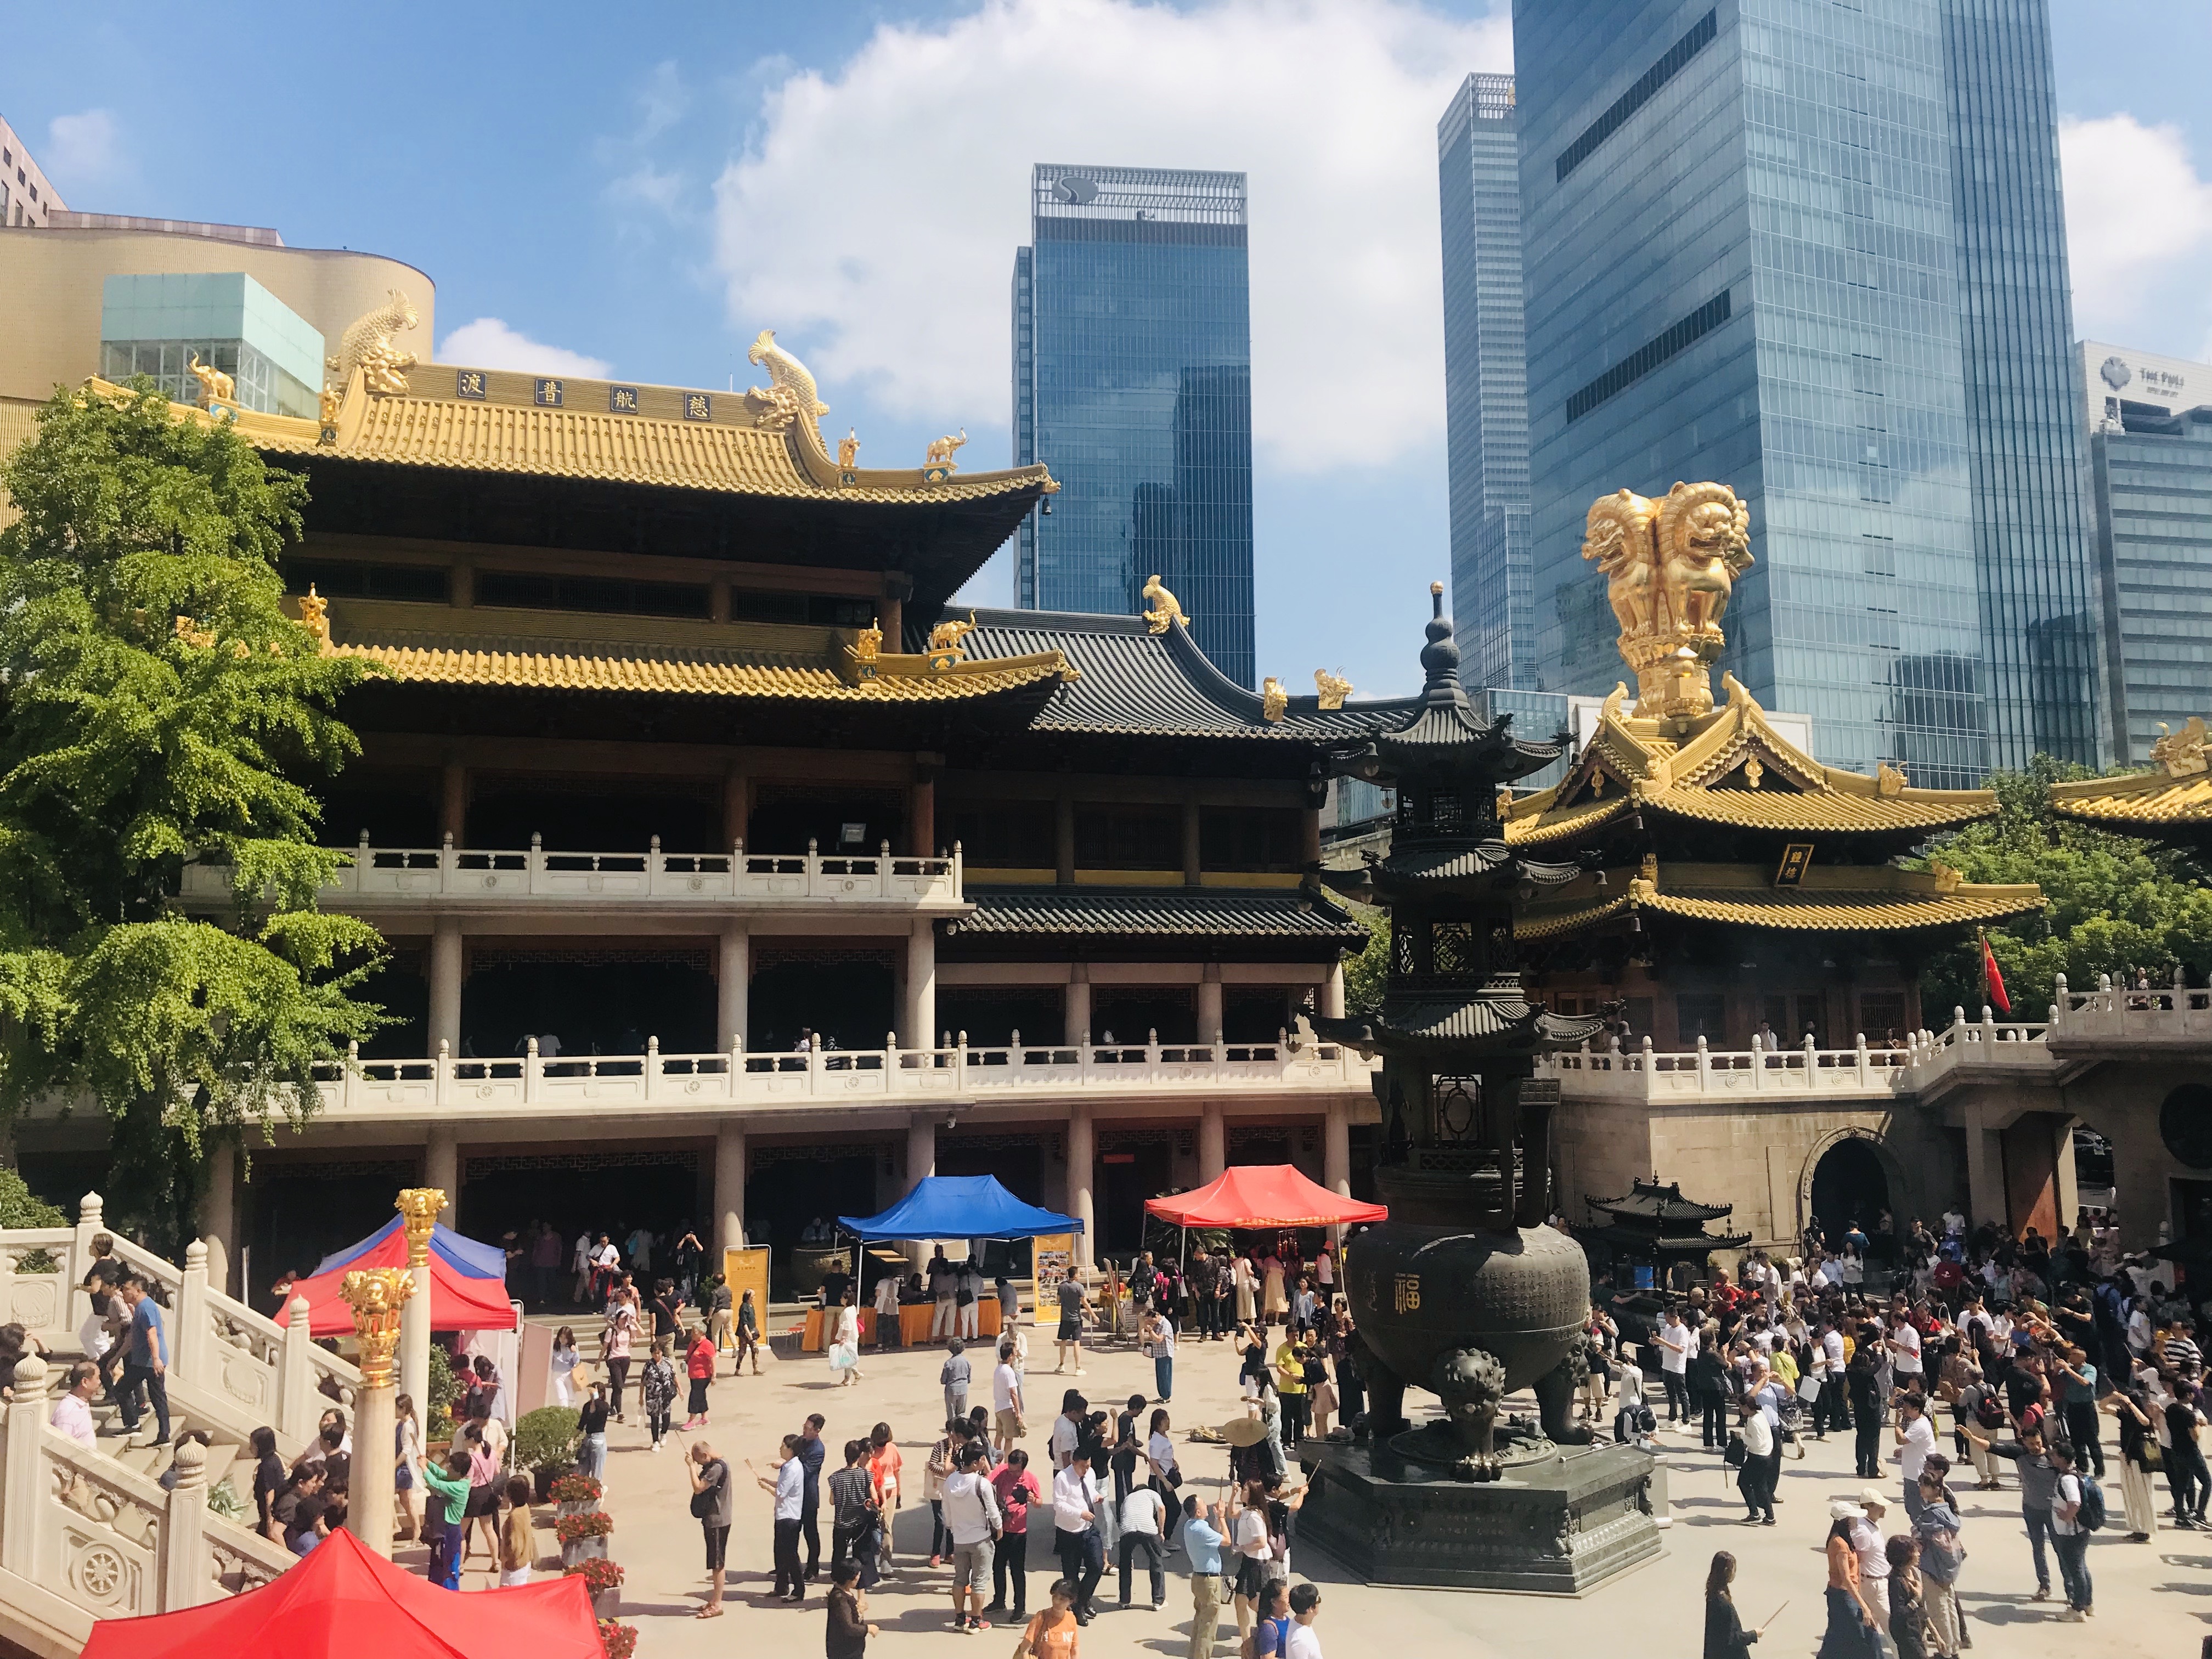 Jing'an Temple with the courtyard in the front and view of Shanghai skyscapers on the horizon.